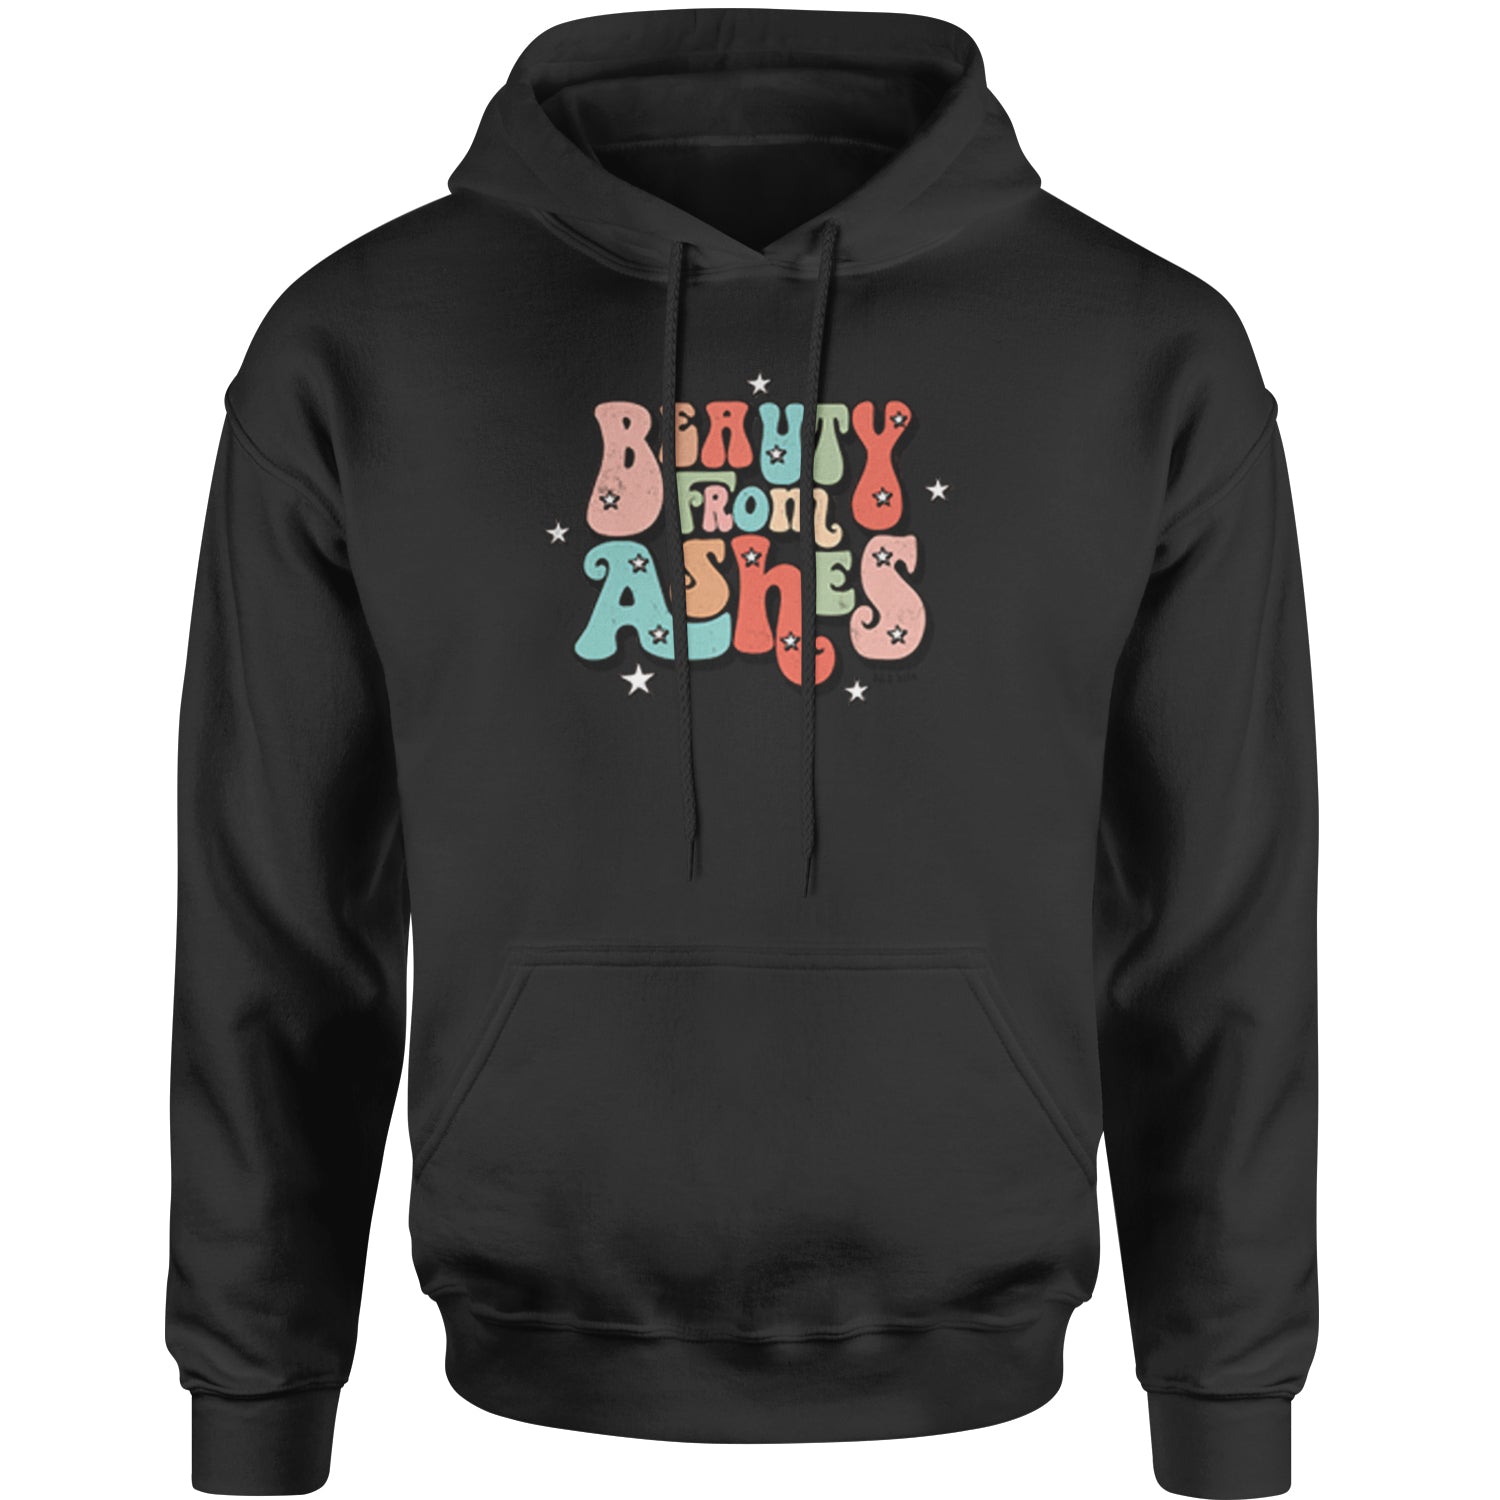 Beauty From Ashes Adult Hoodie Sweatshirt